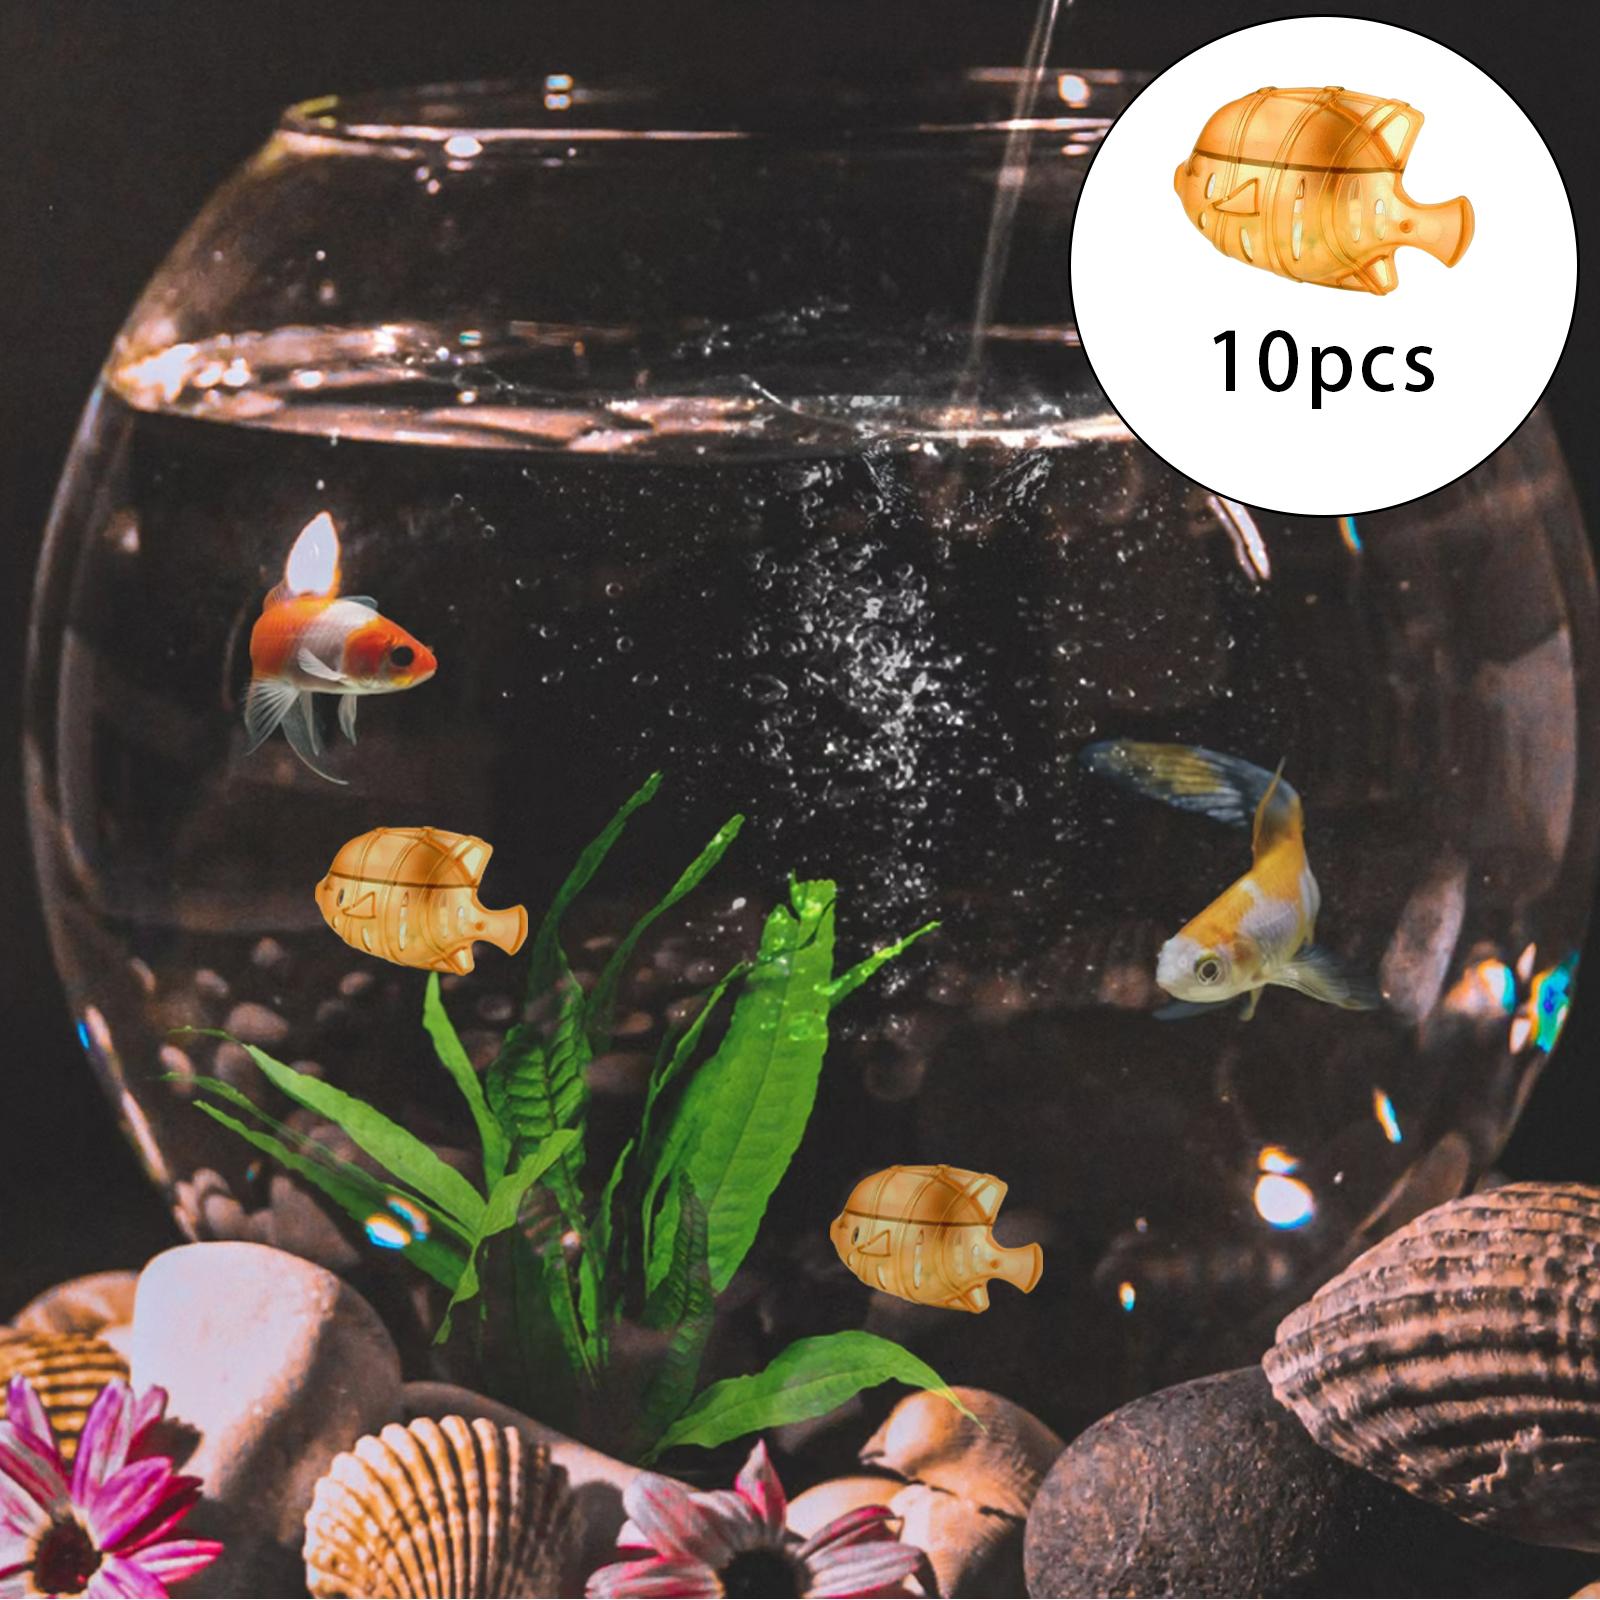 10pcs Humidifier Cleaner Warm/Cool Mist Fish Tank Fresher Fishes Yellow